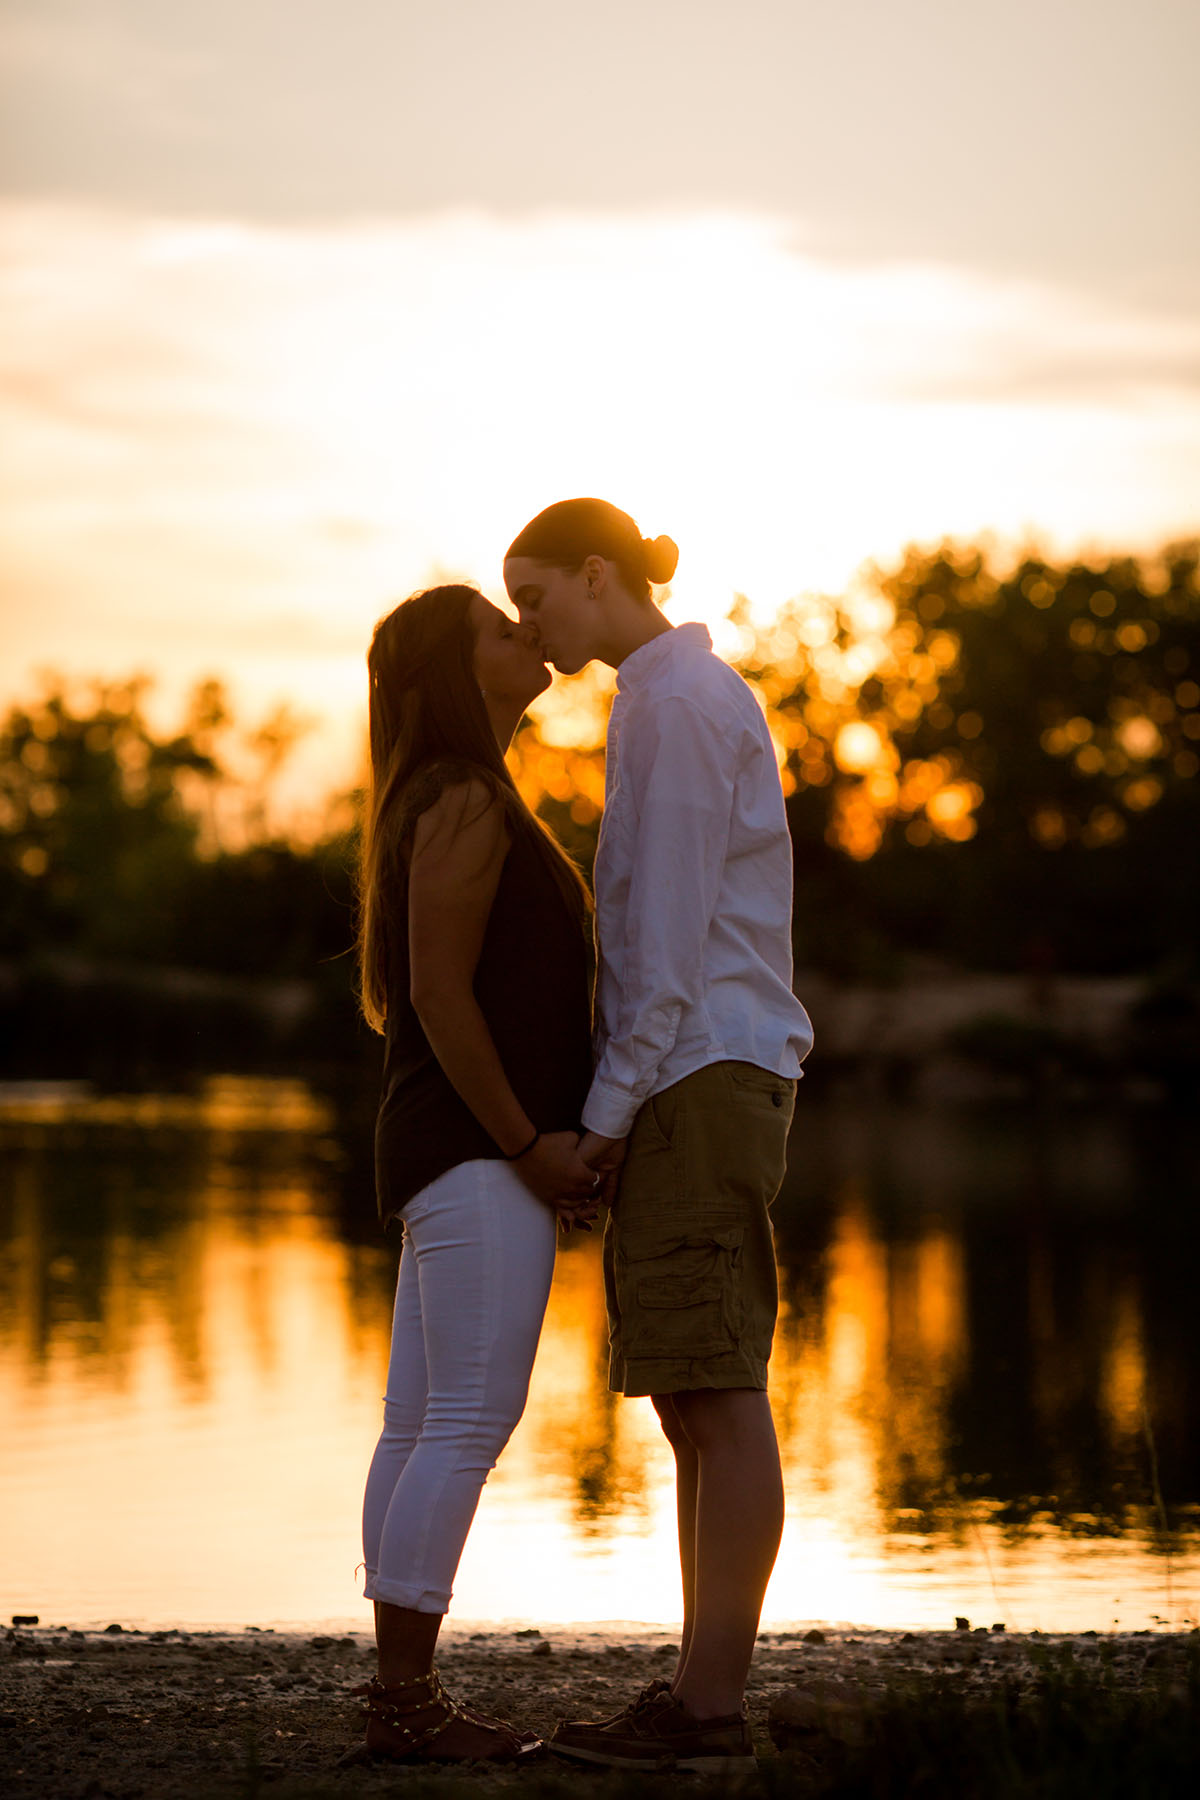 Sunset family portraits by the lake kiss